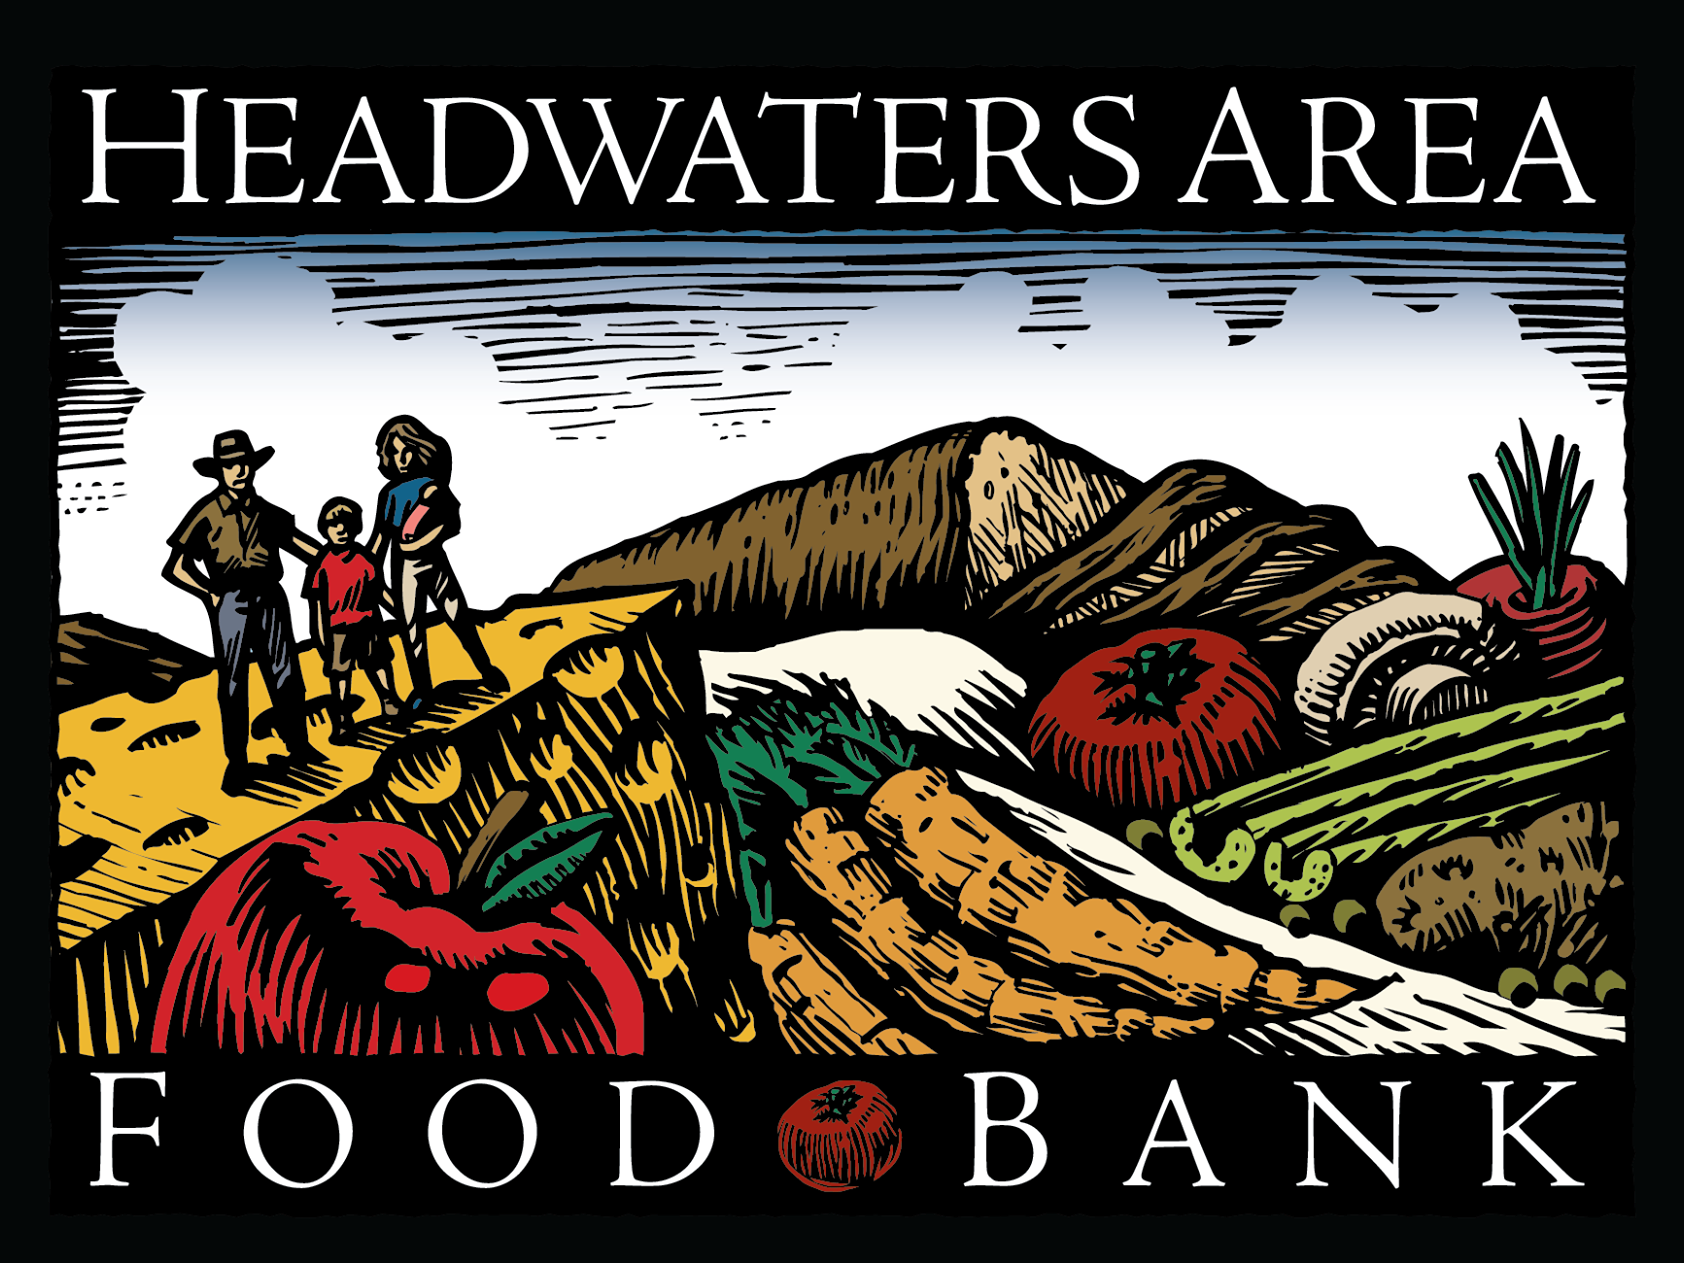 The Headwaters Area Food Bank